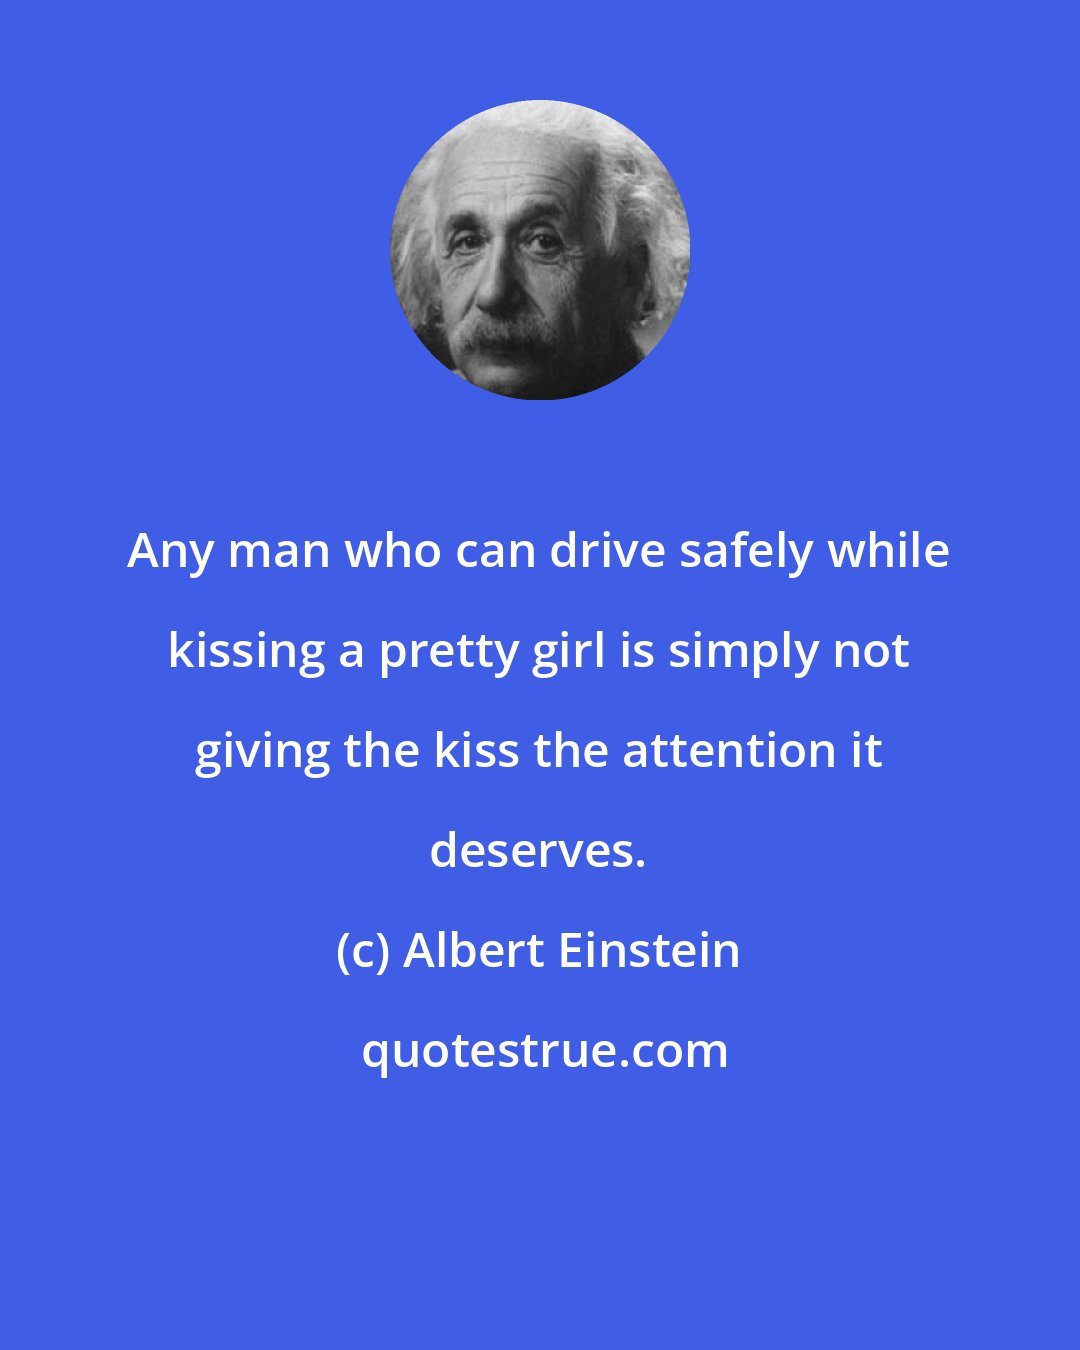 Albert Einstein: Any man who can drive safely while kissing a pretty girl is simply not giving the kiss the attention it deserves.